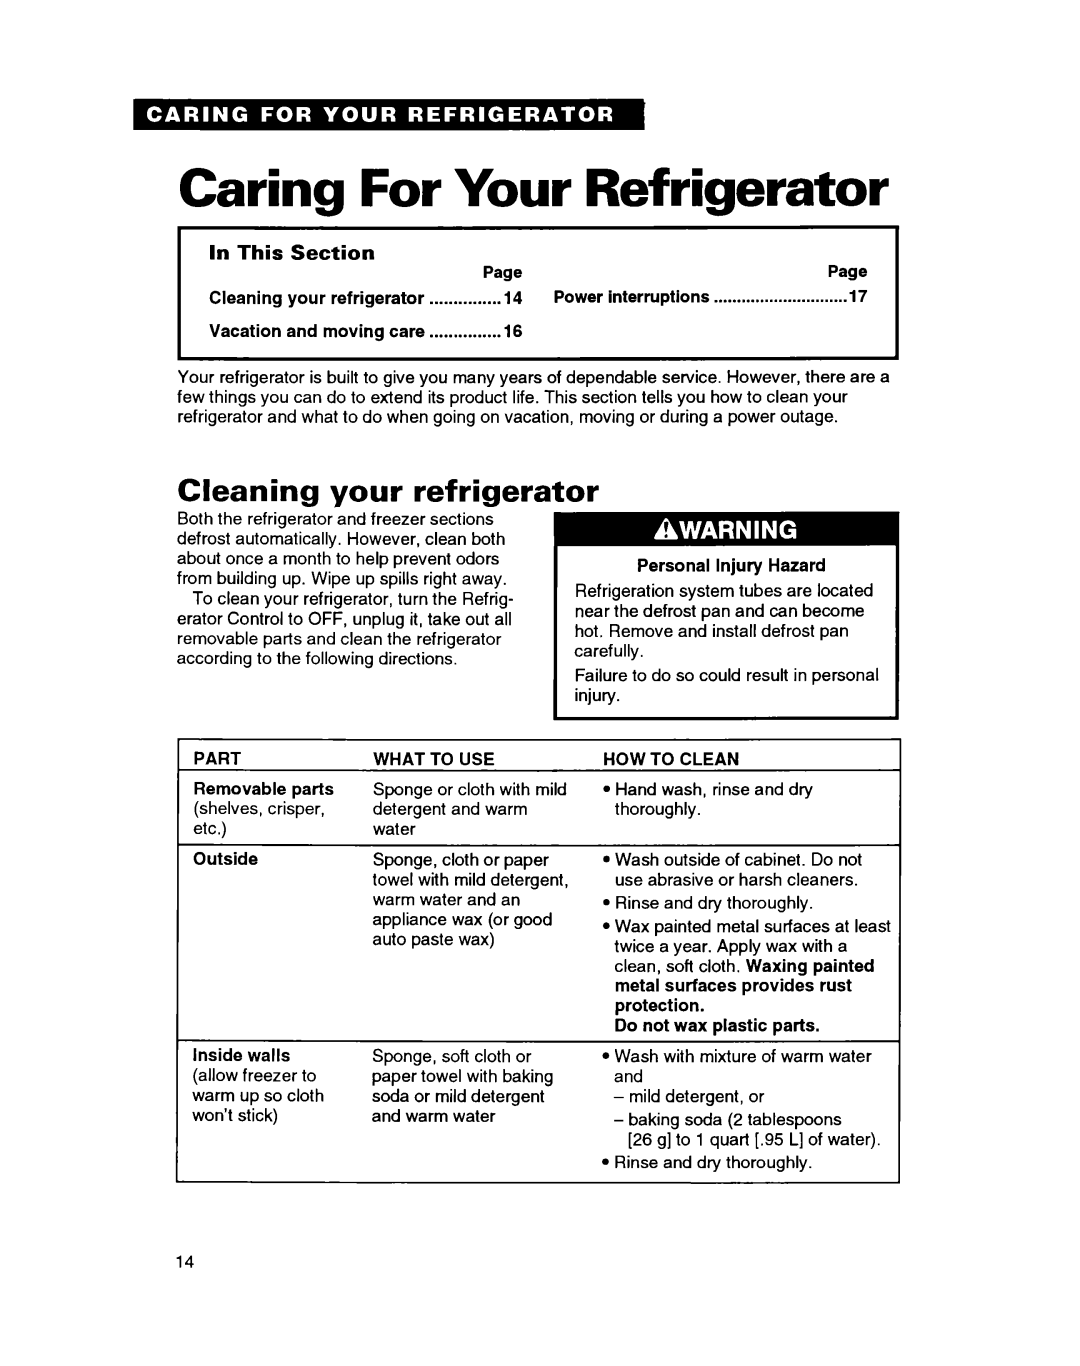 Whirlpool ET18GK warranty Caring For Your Refrigerator, Cleaning your refrigerator, In This, Section 